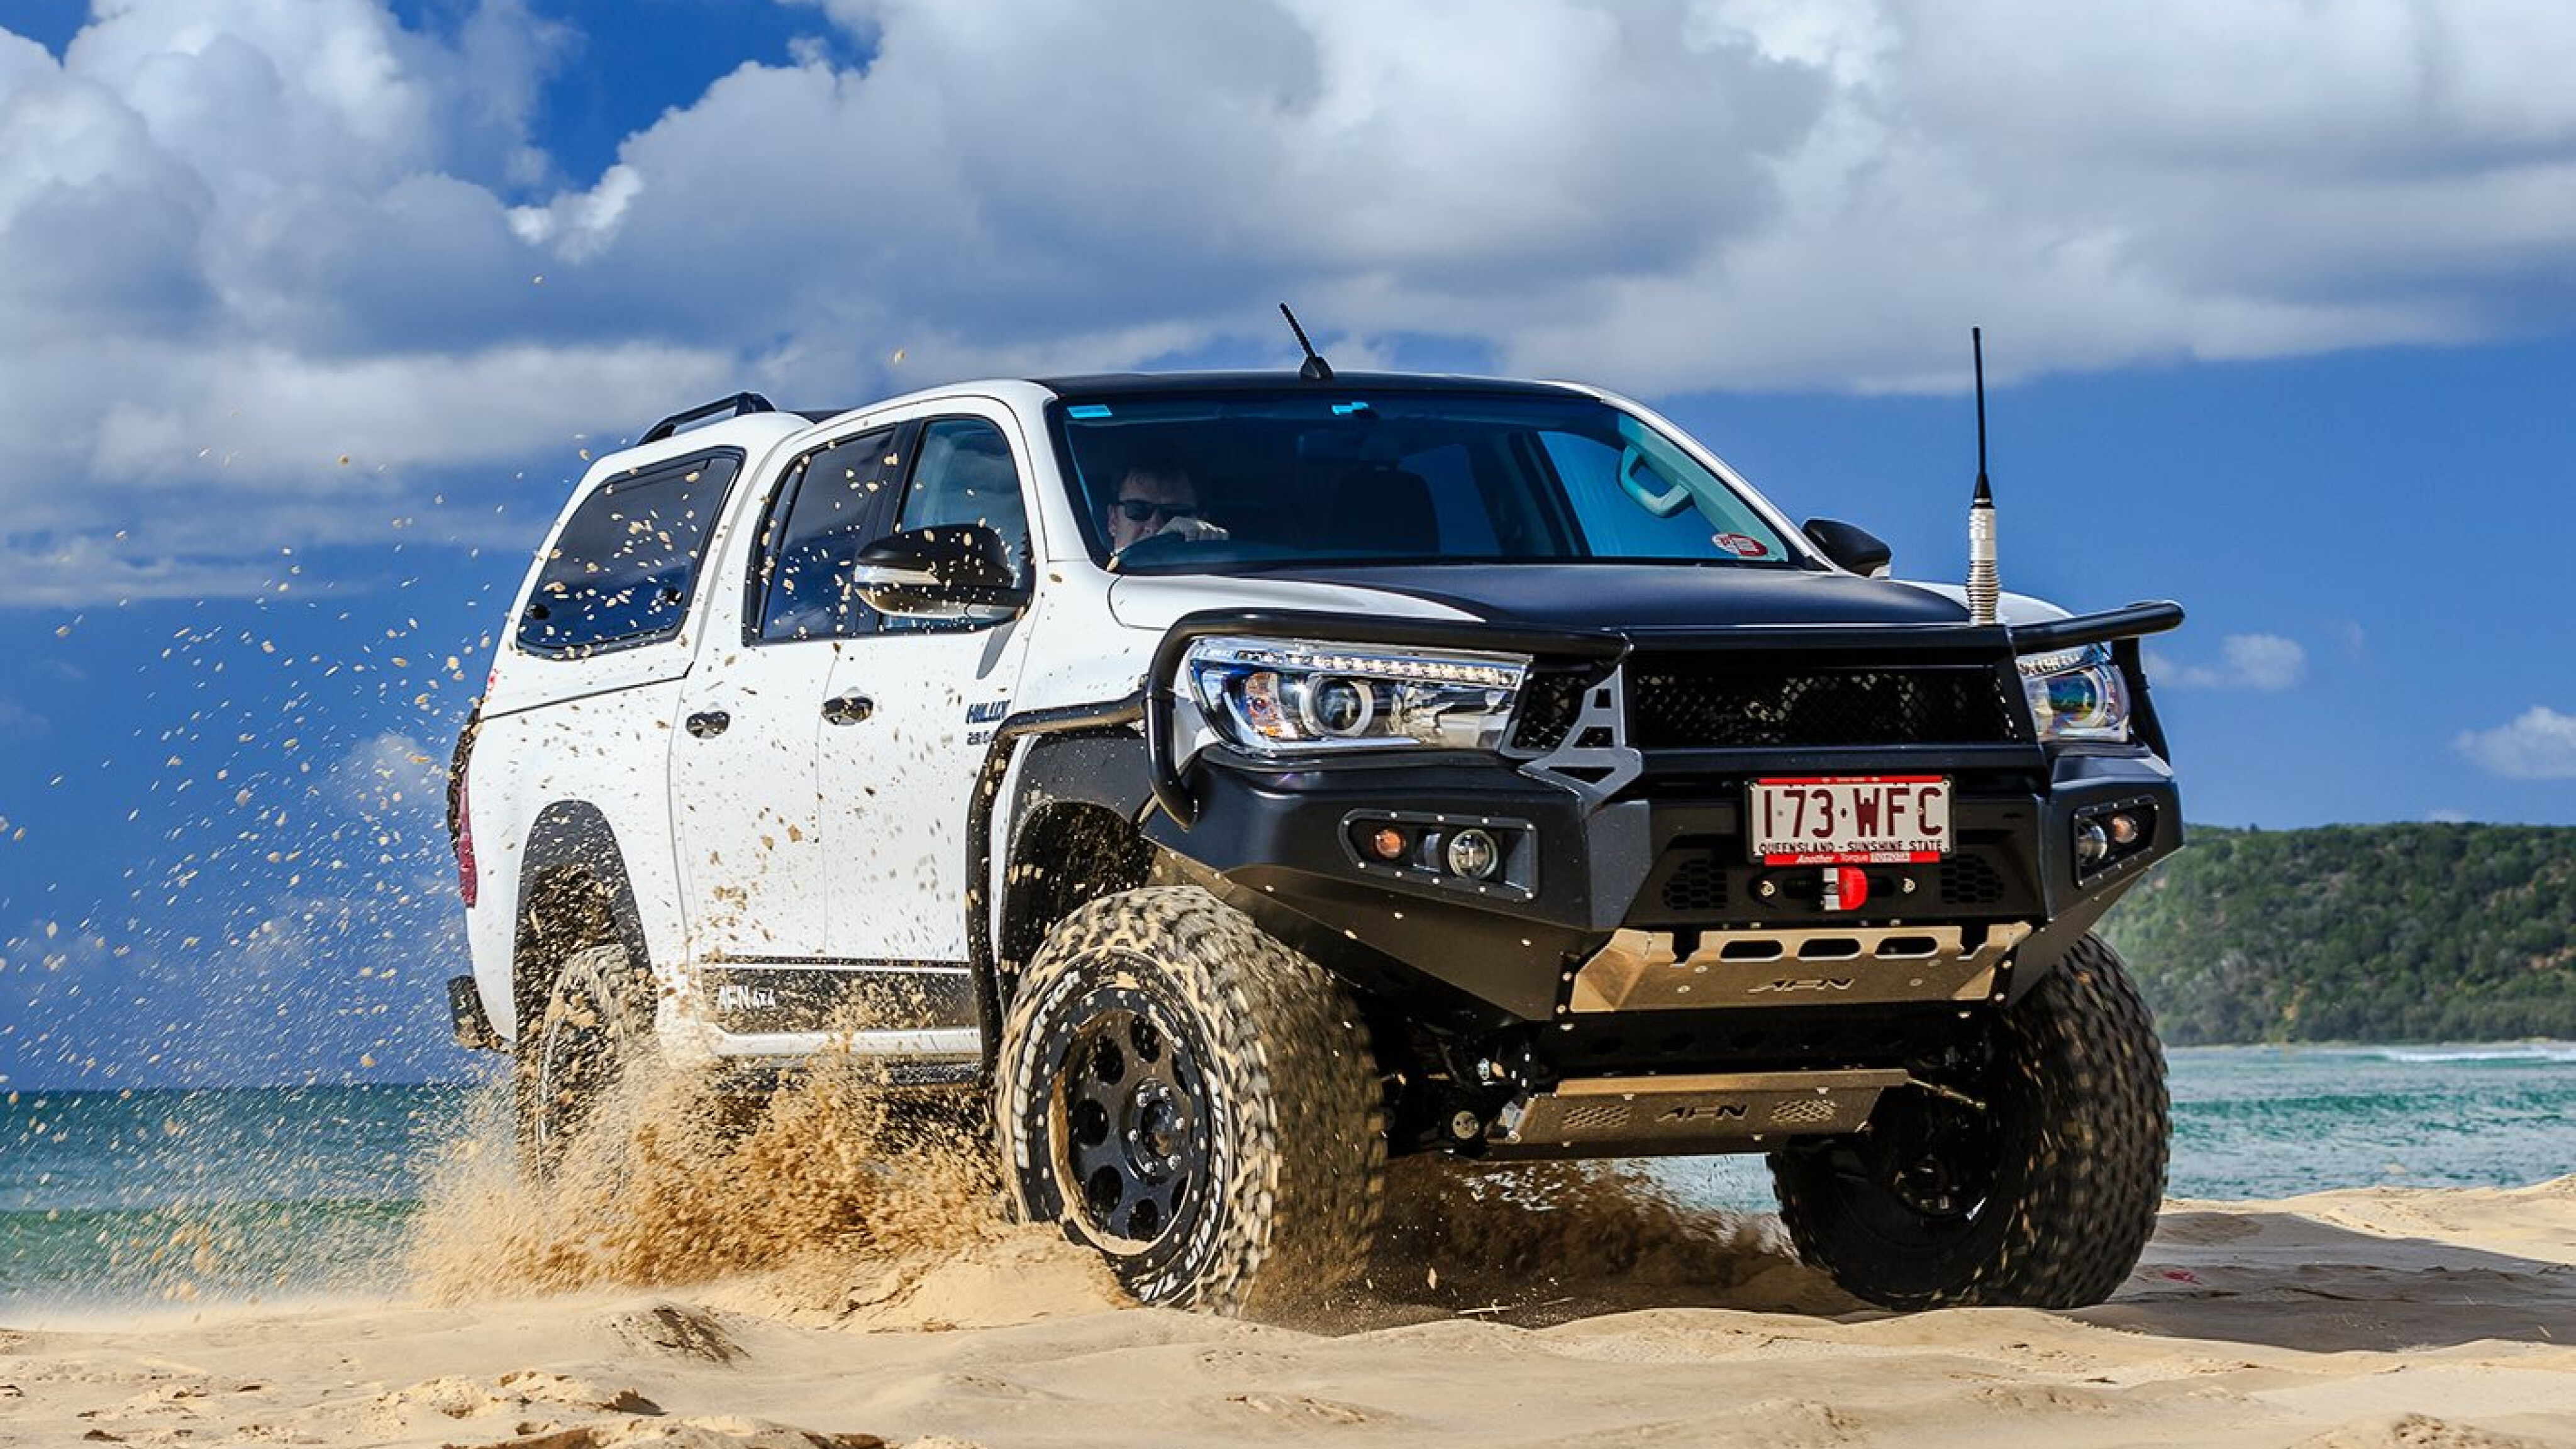 Isuzu D-Max ready for top guns in Toyota Hilux and Ford Ranger stables